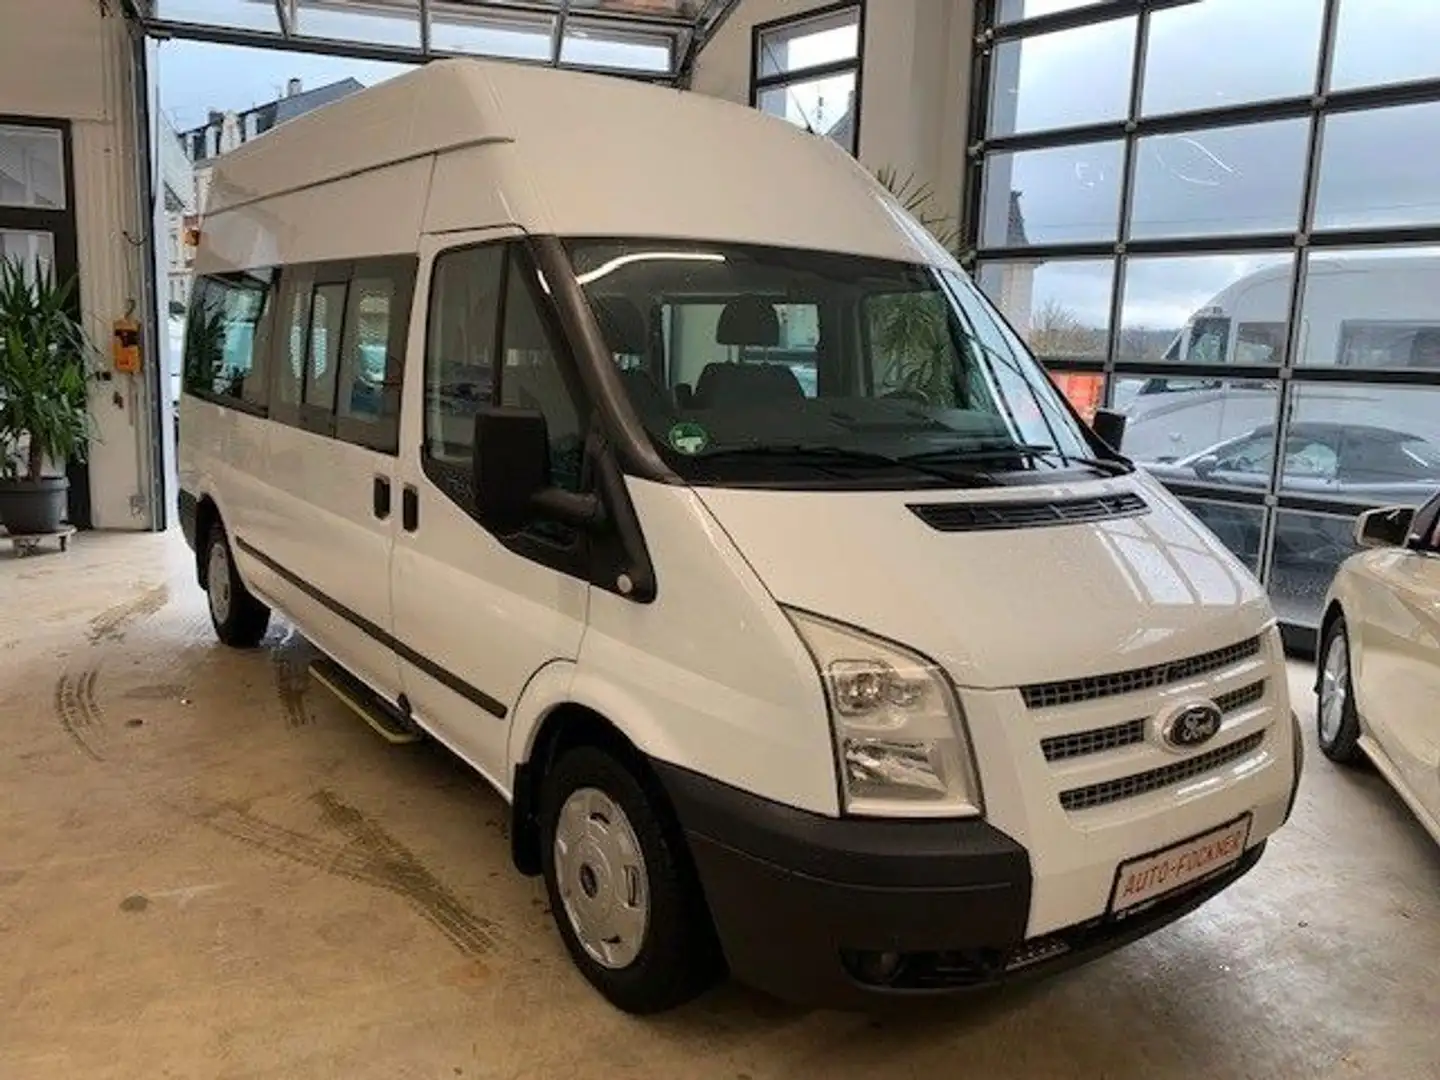 Ford Transit 2.2 TDCi extrahoch lang Lift Systemboden Alb - 1